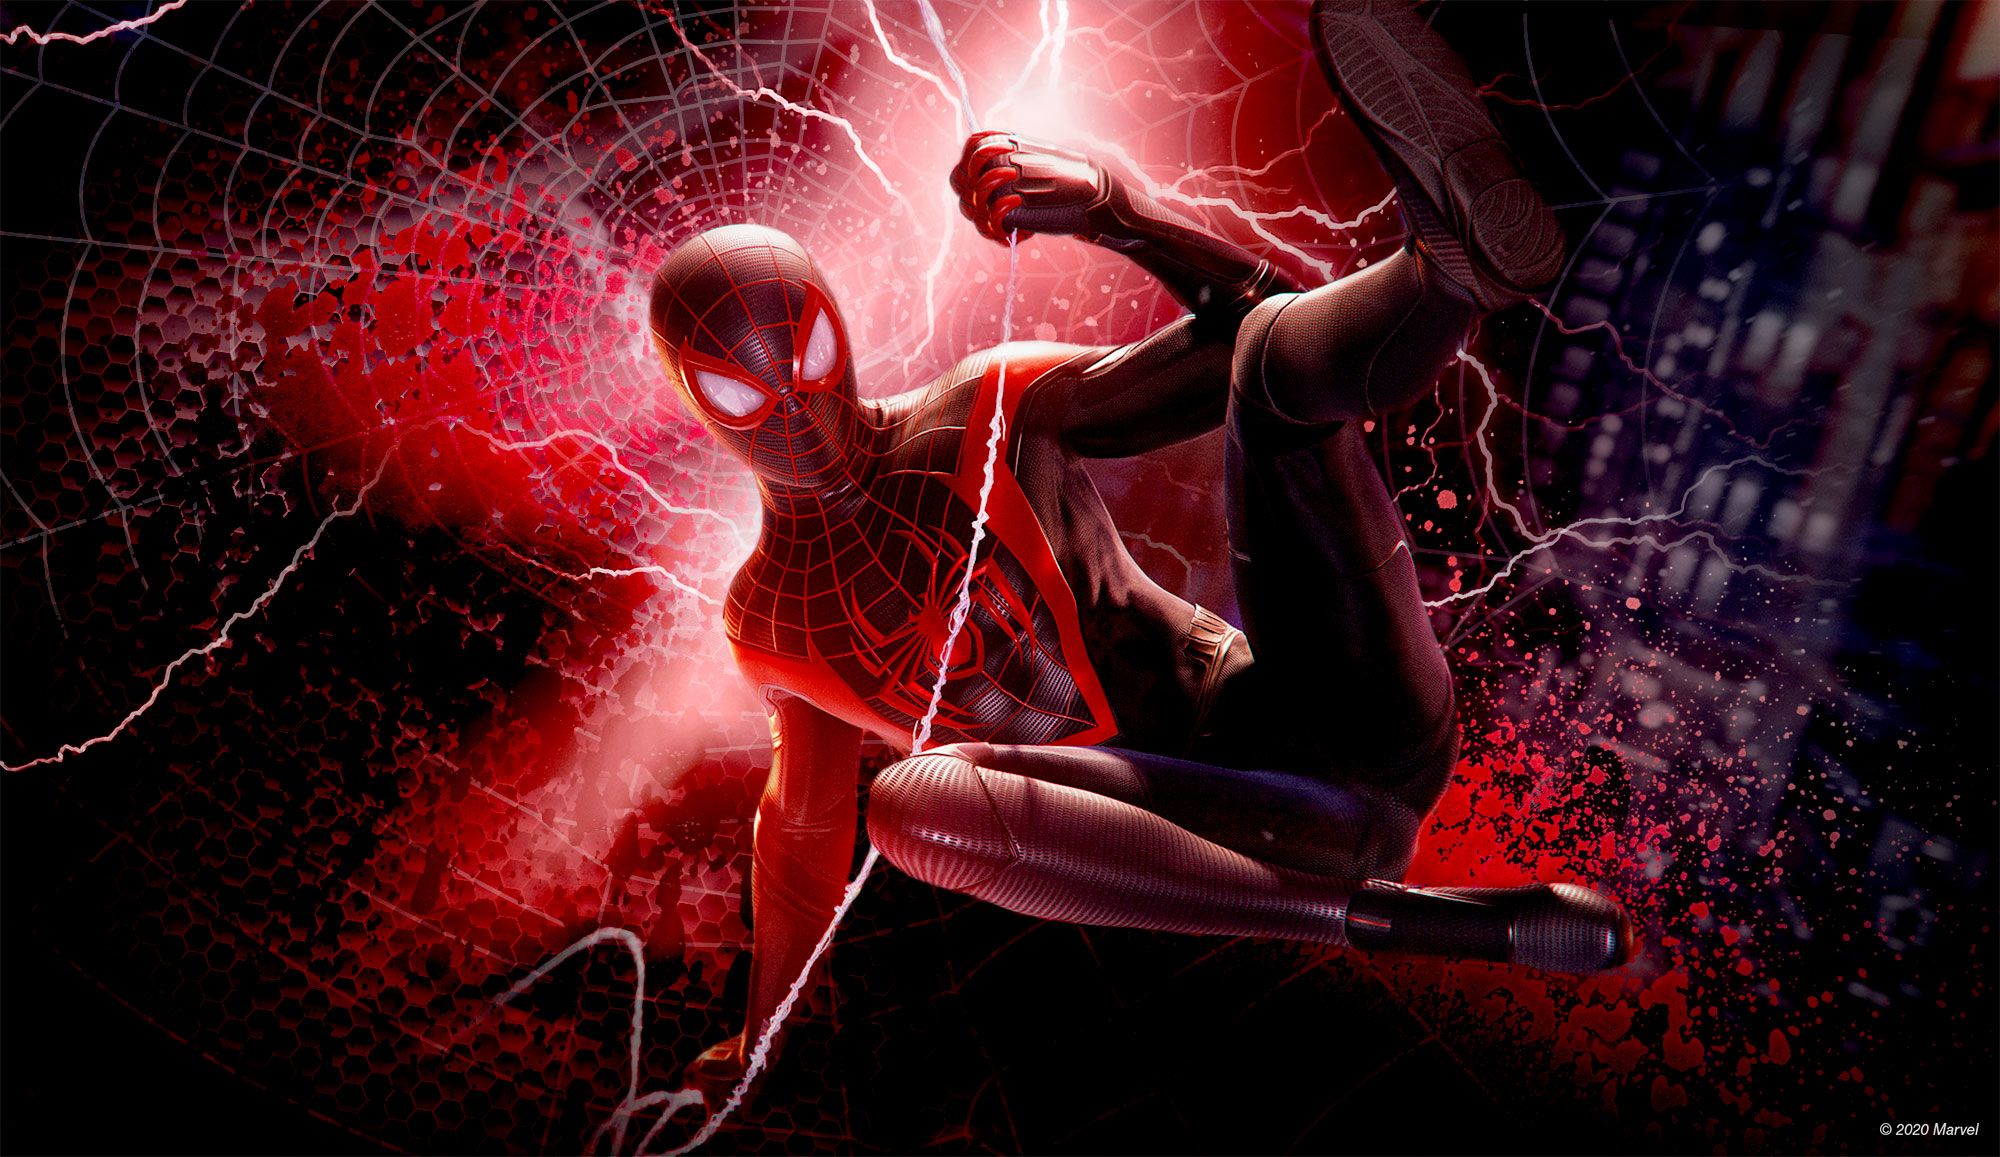 Miles Morales Spider Man PS4 Wallpaper, HD Games 4K Wallpaper, Image, Photo And Background